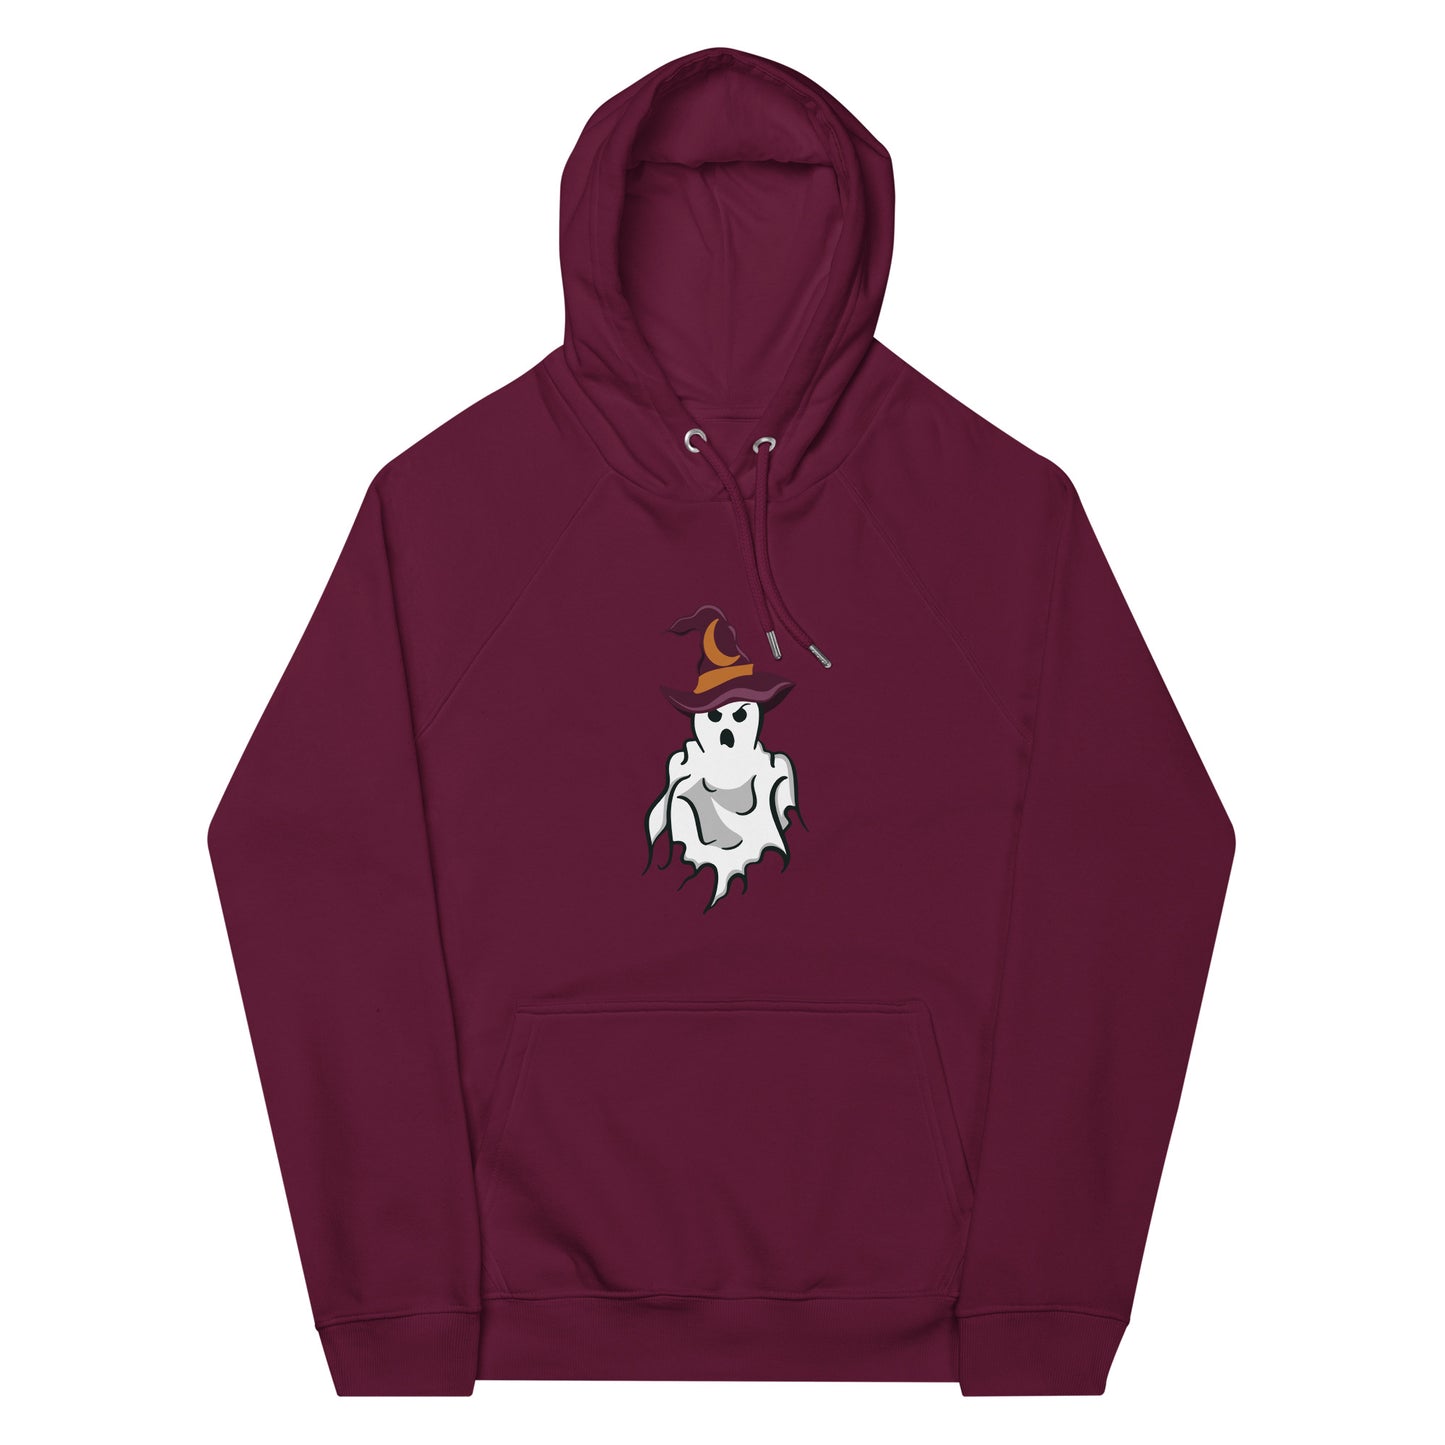 Hoodie with a ghost wearing a witch hatModel wearing a hoodie with a ghost wearing a witch hat